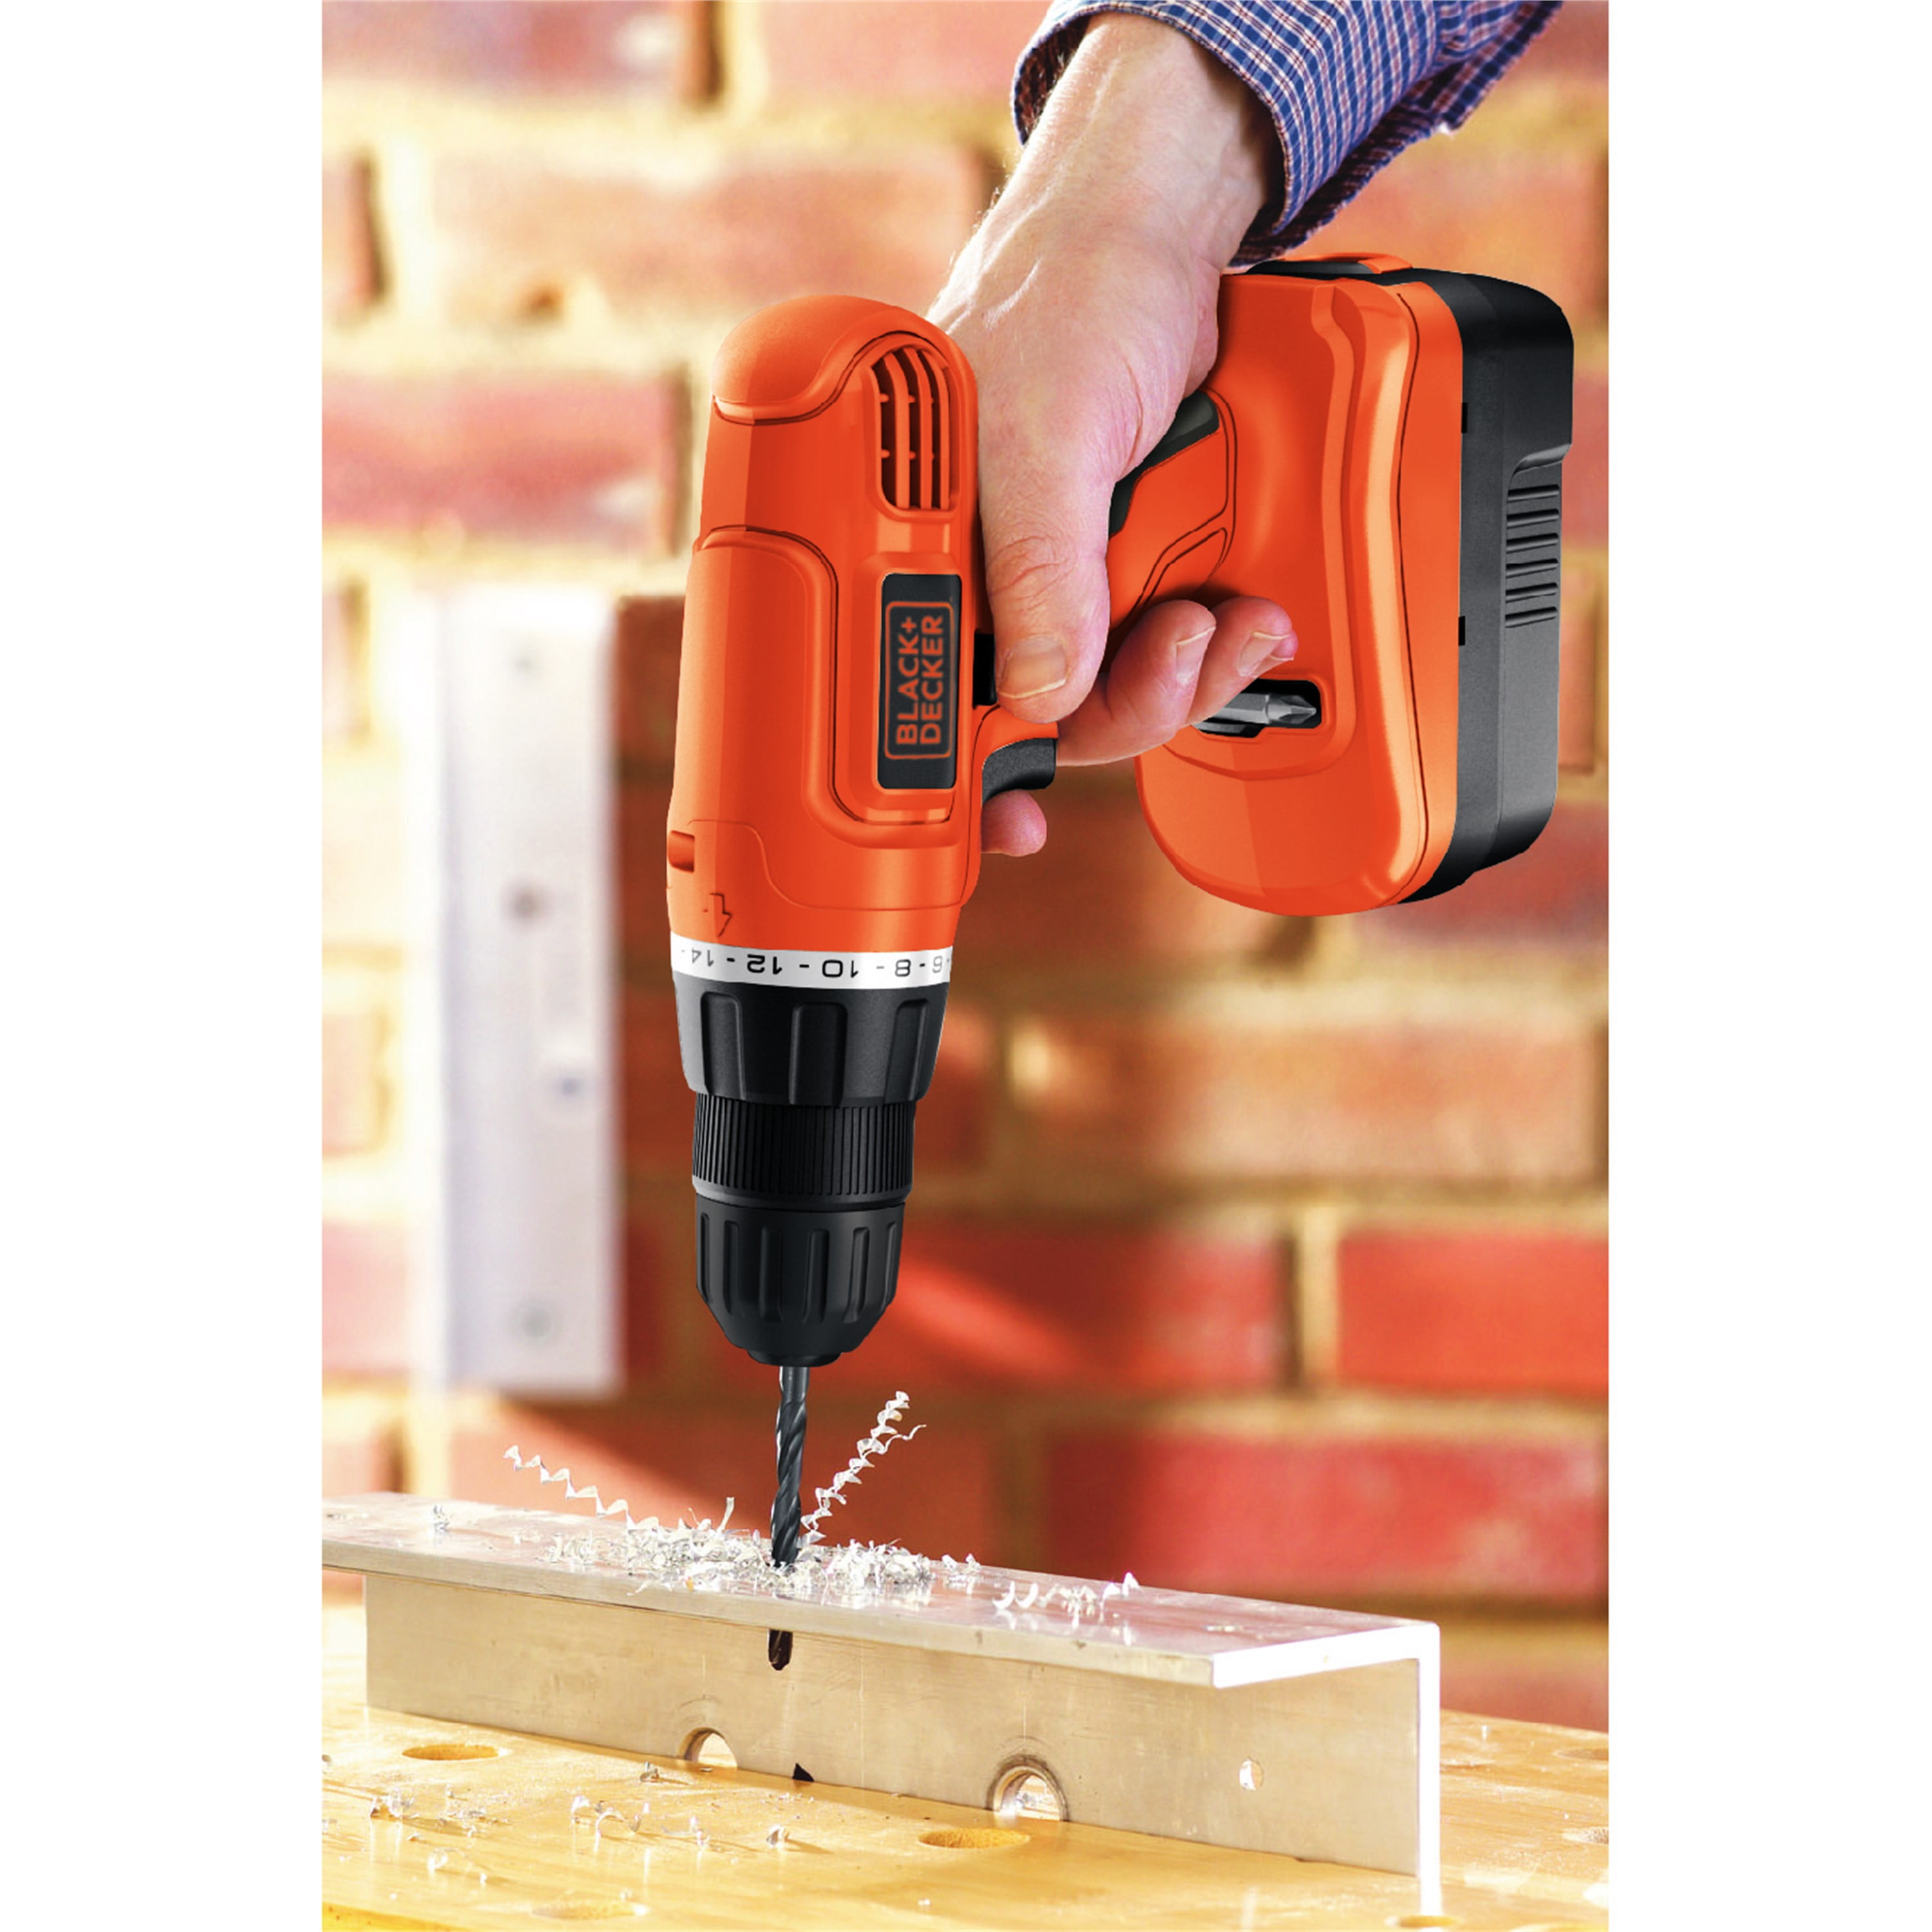 BLACK+DECKER 18 V Lithium-Ion Drill Driver with Kit Box and 2